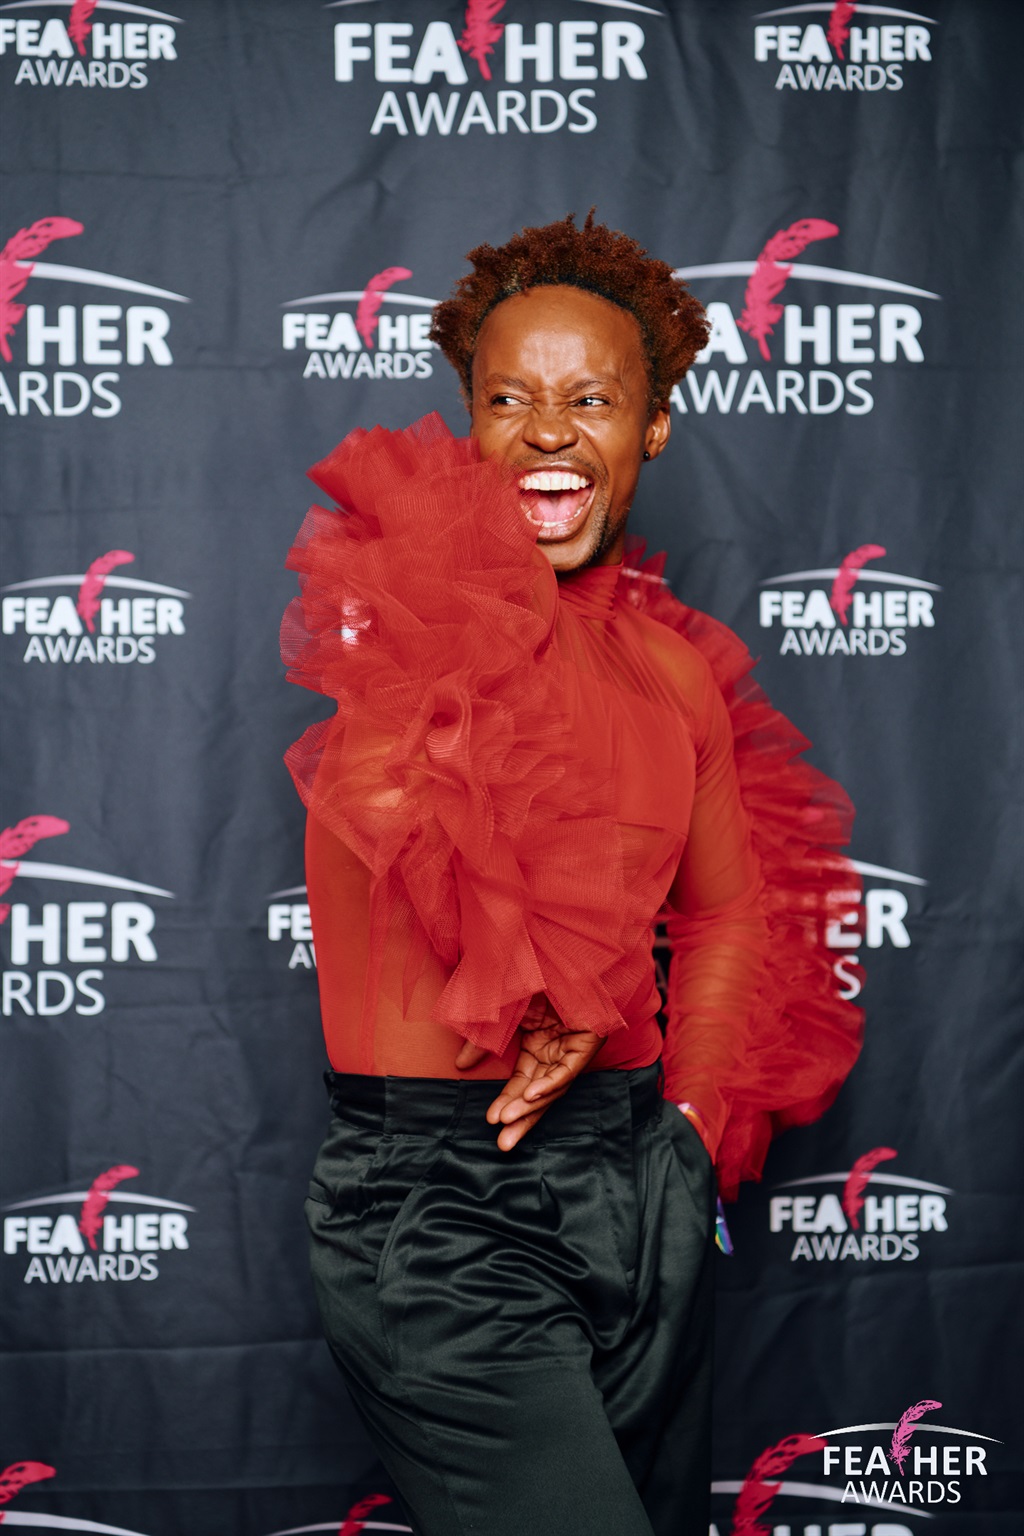 Feather Awards 2022